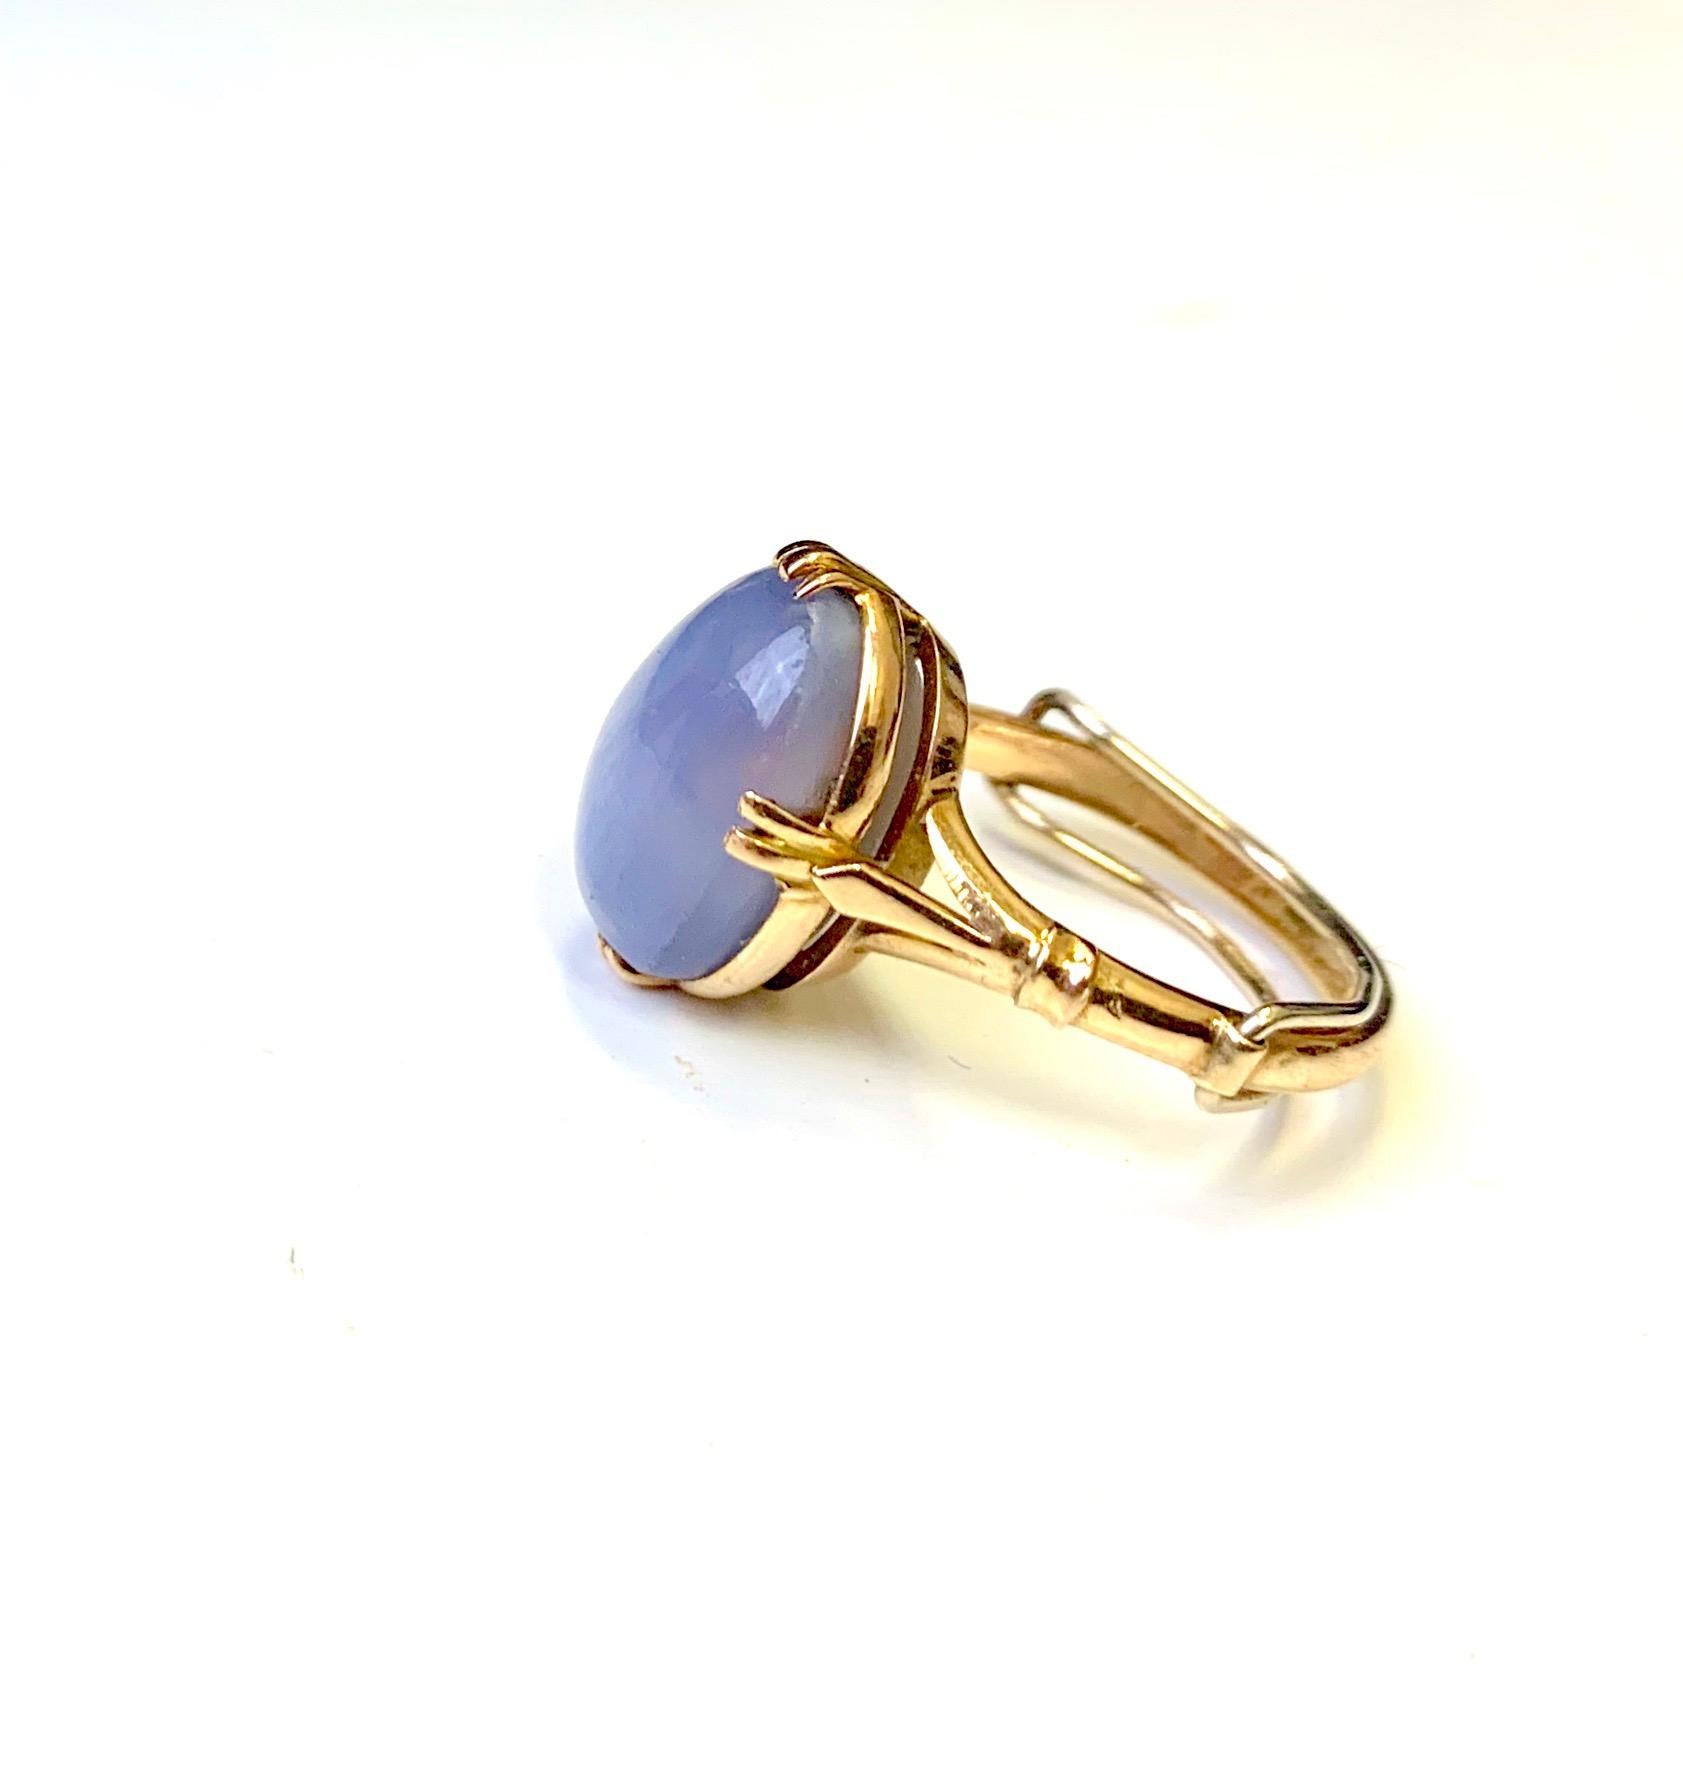 This Victorian star sapphire ring has a center stone that’s oval in shape and cabochon cut. The center stone is a star sapphire which compliments the blush tone of the gold which is in between yellow and rose with its original patina. The ring is